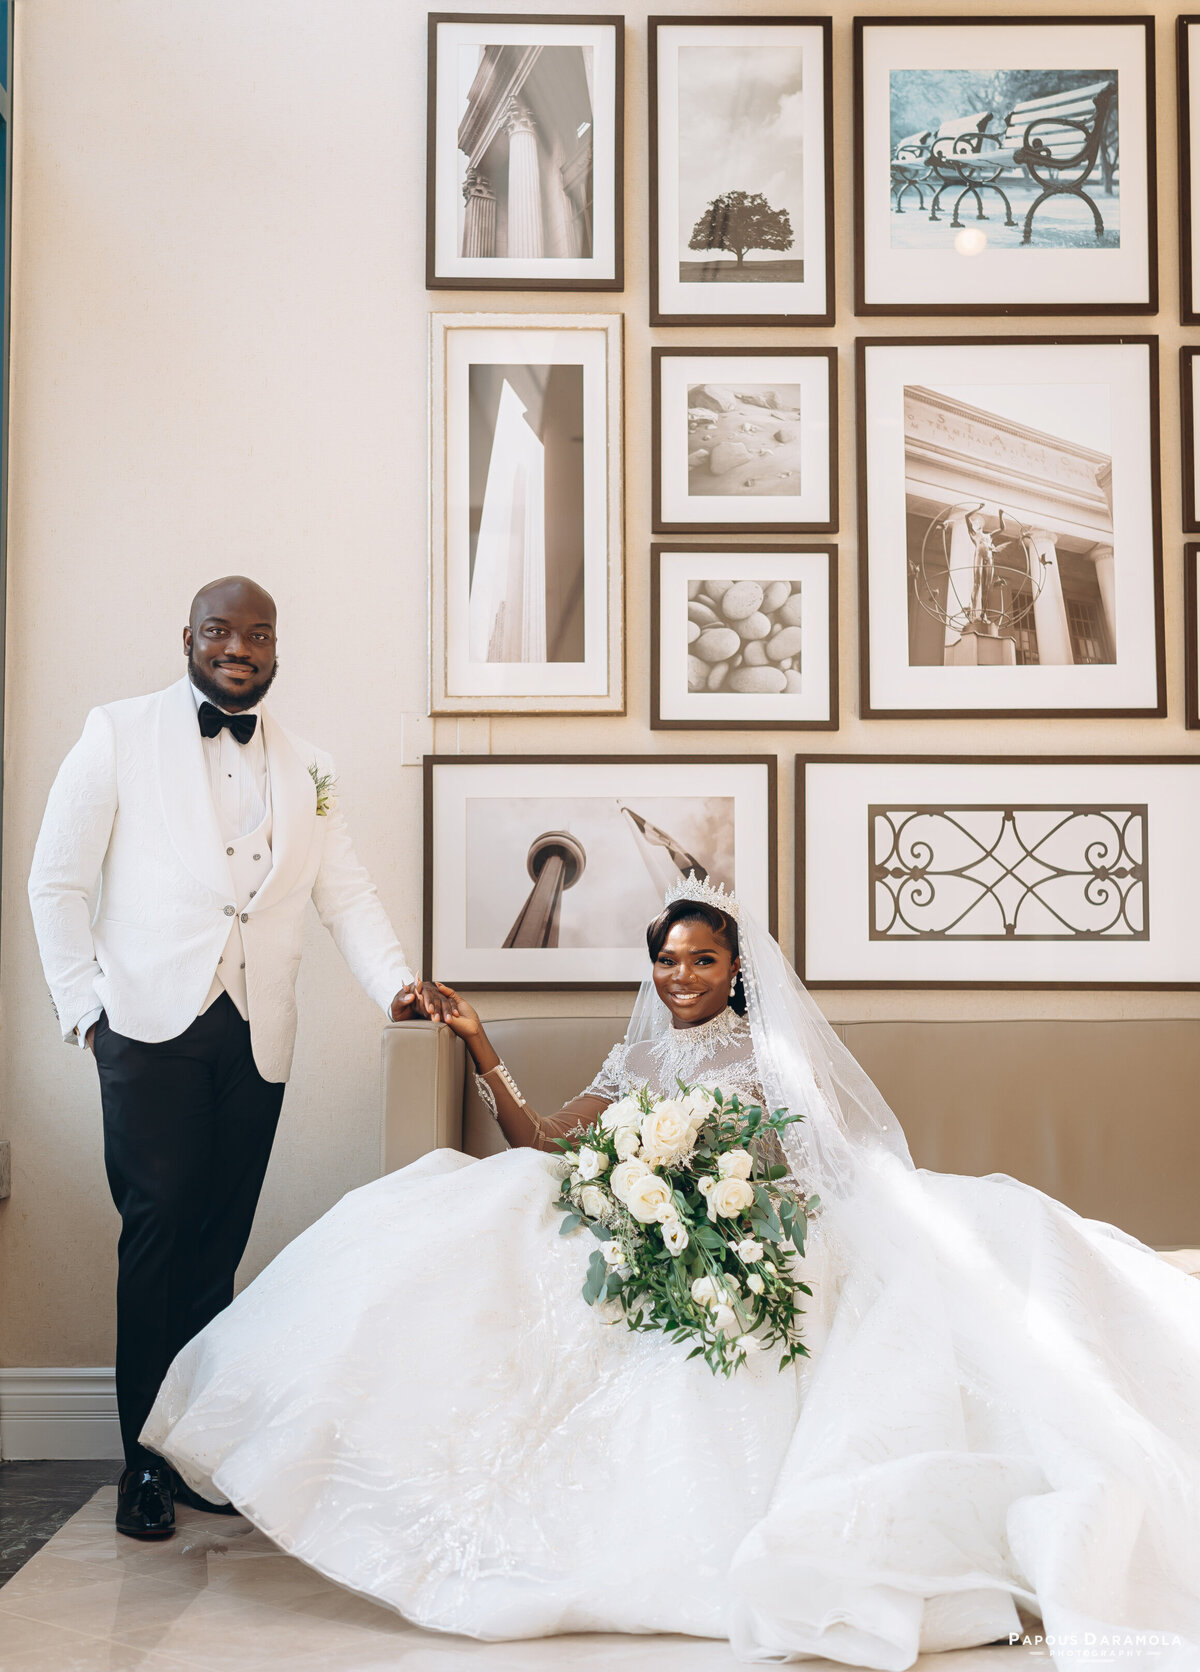 Abigail and Abije Oruka Events Papouse photographer Wedding event planners Toronto planner African Nigerian Eyitayo Dada Dara Ayoola outdoor ceremony floral princess ballgown rolls royce groom suit potraits  paradise banquet hall vaughn 140